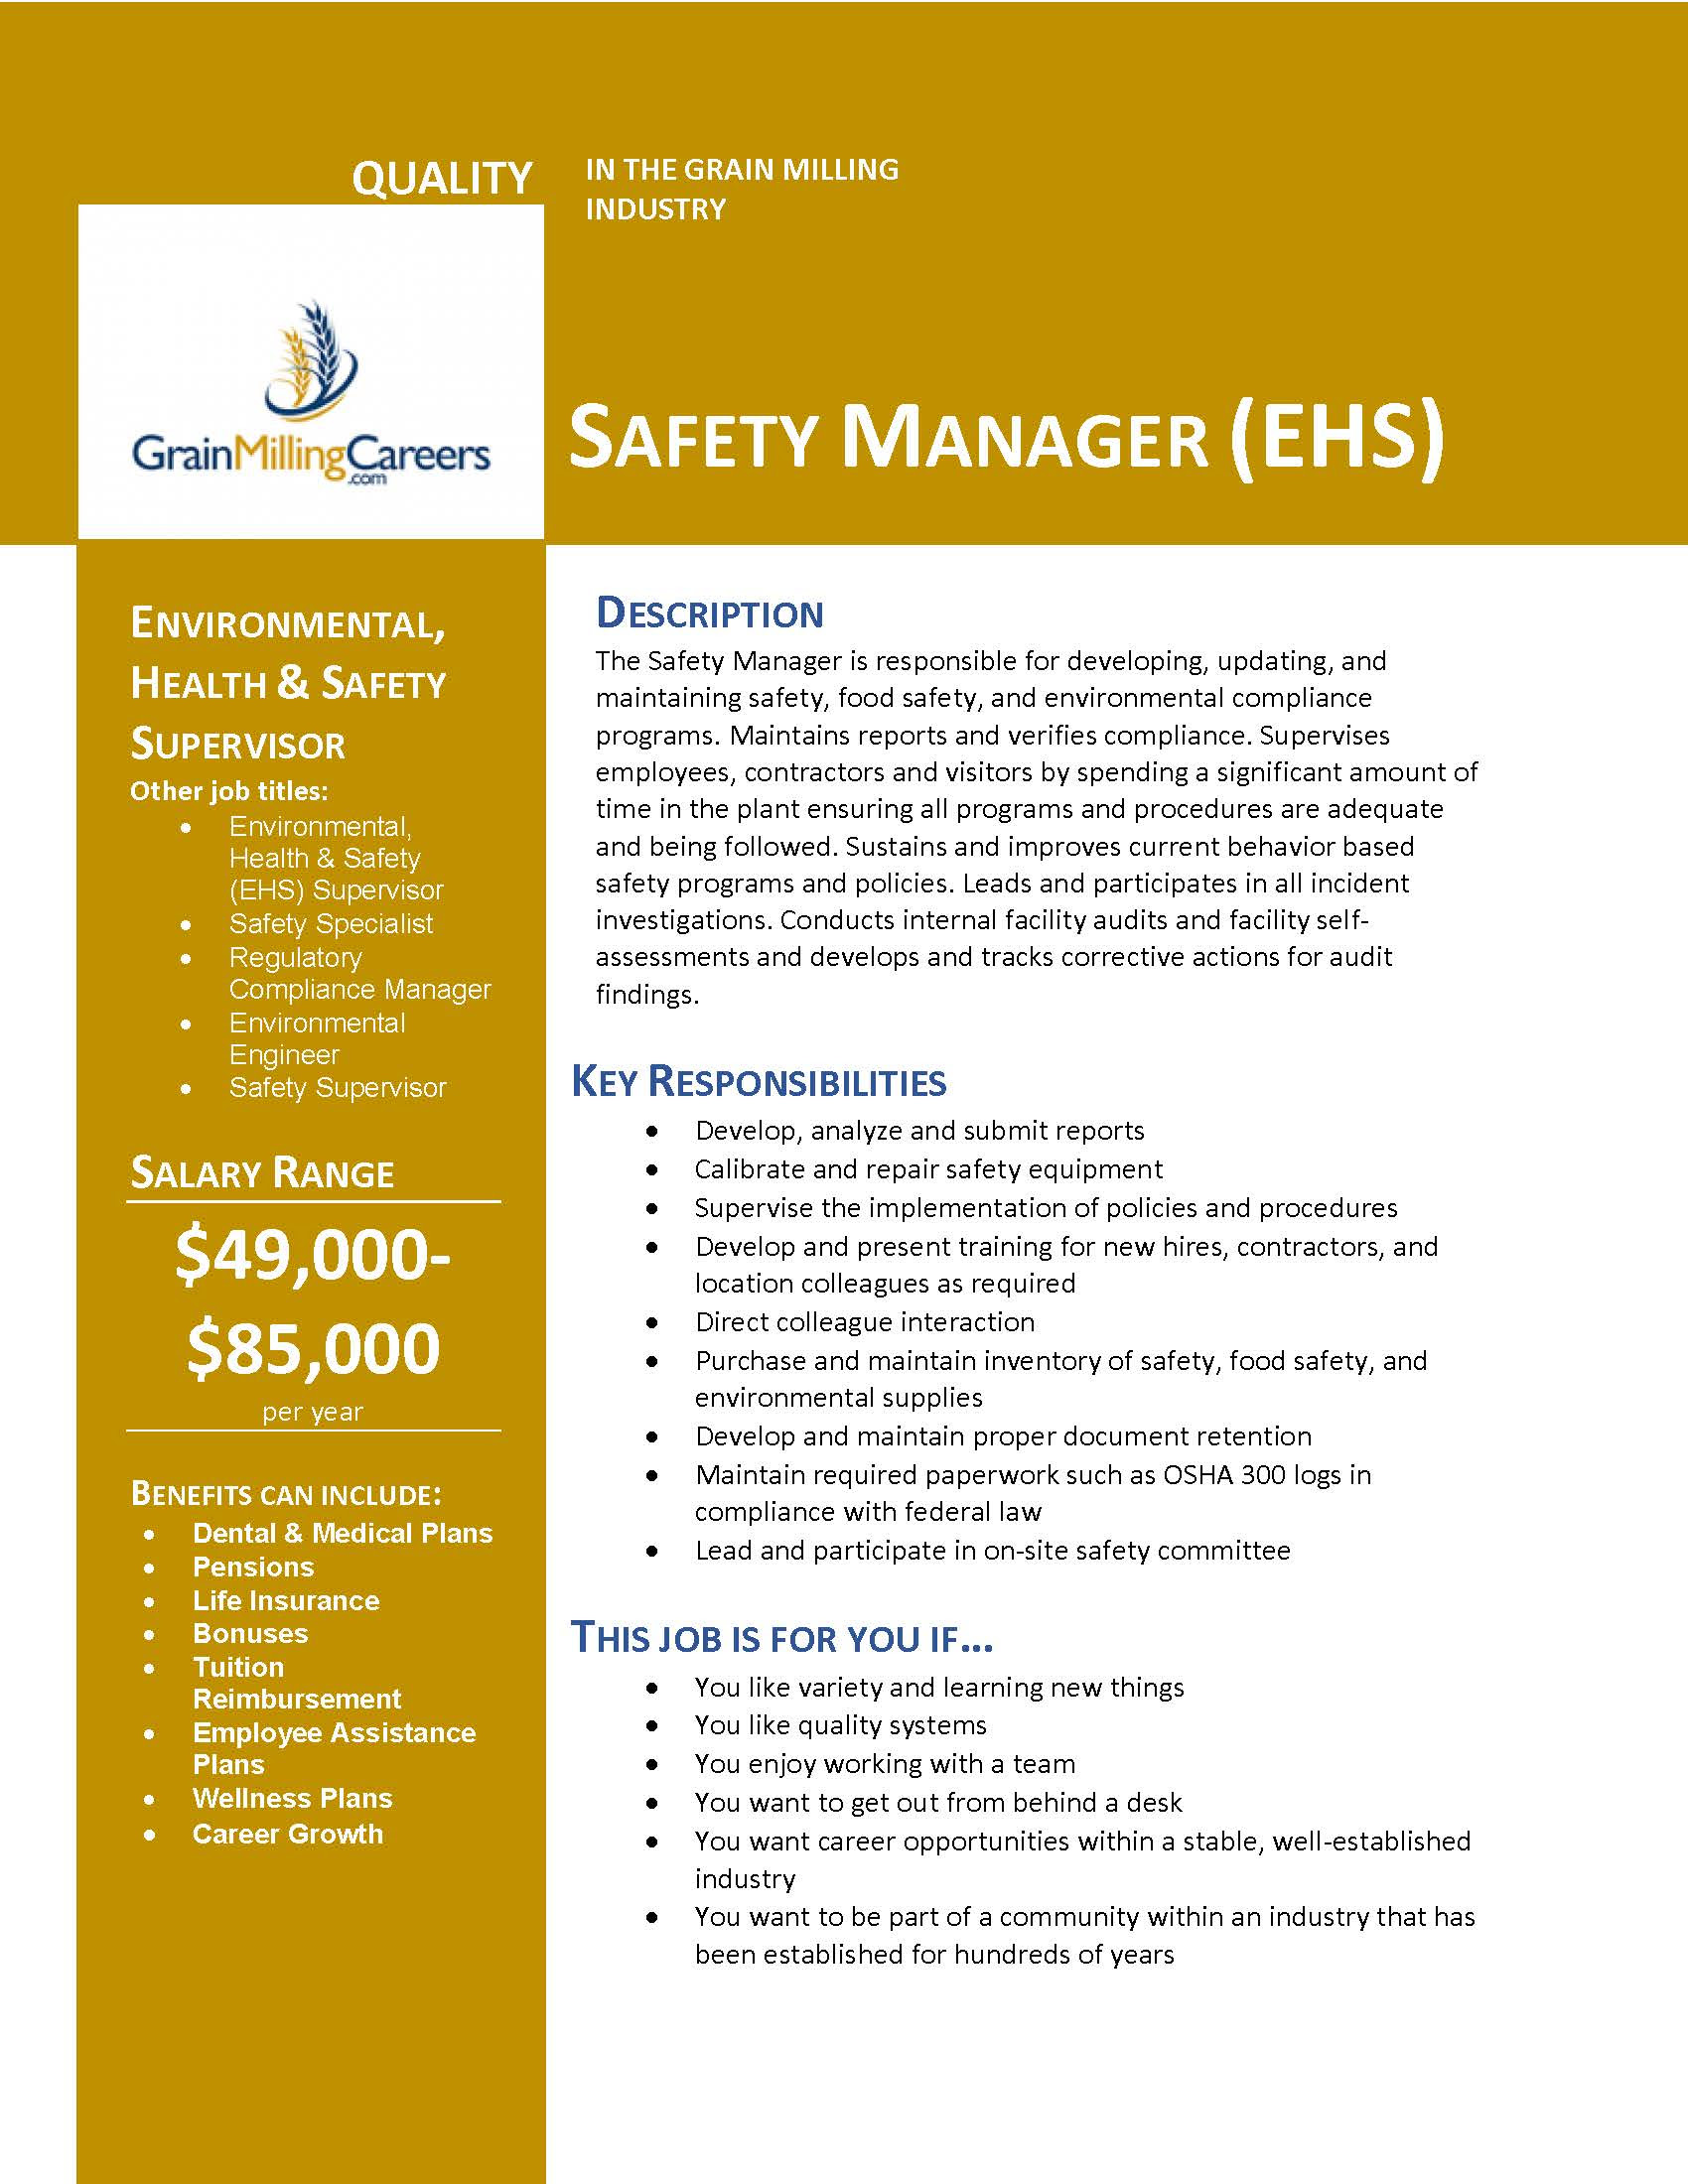 Safety Manager (EHS) - Grain Milling Careers